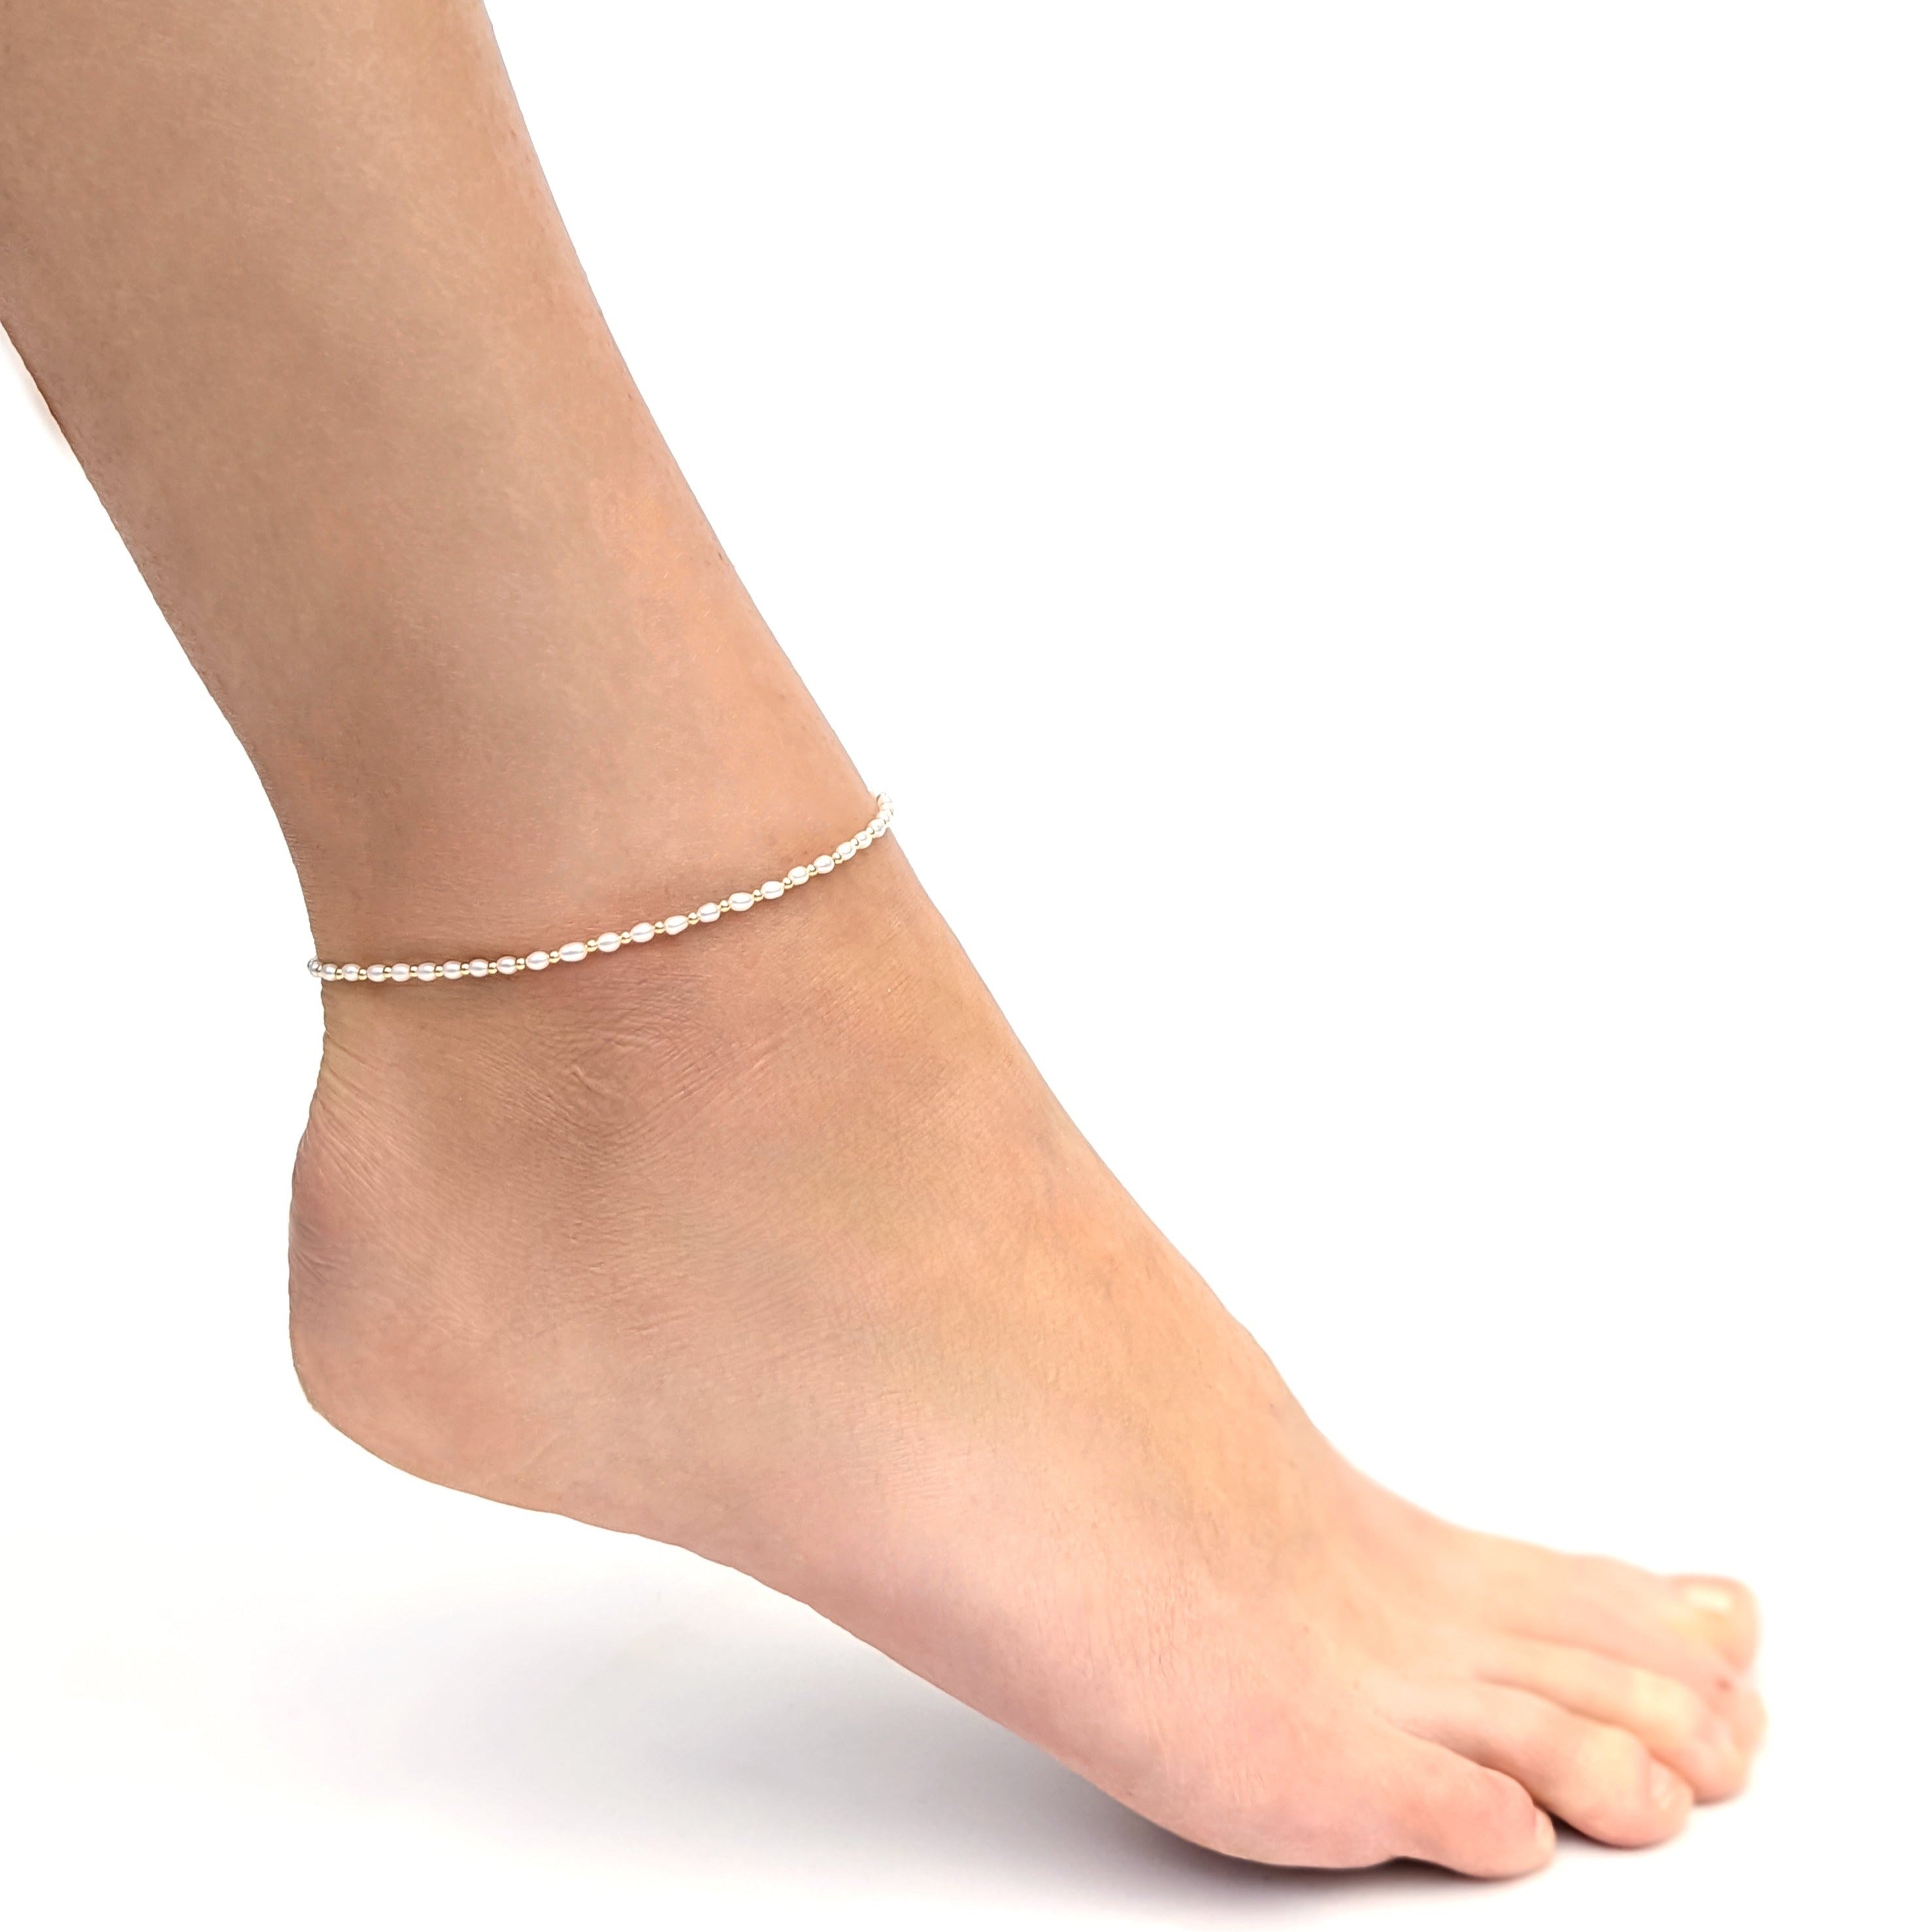 Ankle bracelet with tiny white pearls and gold beads